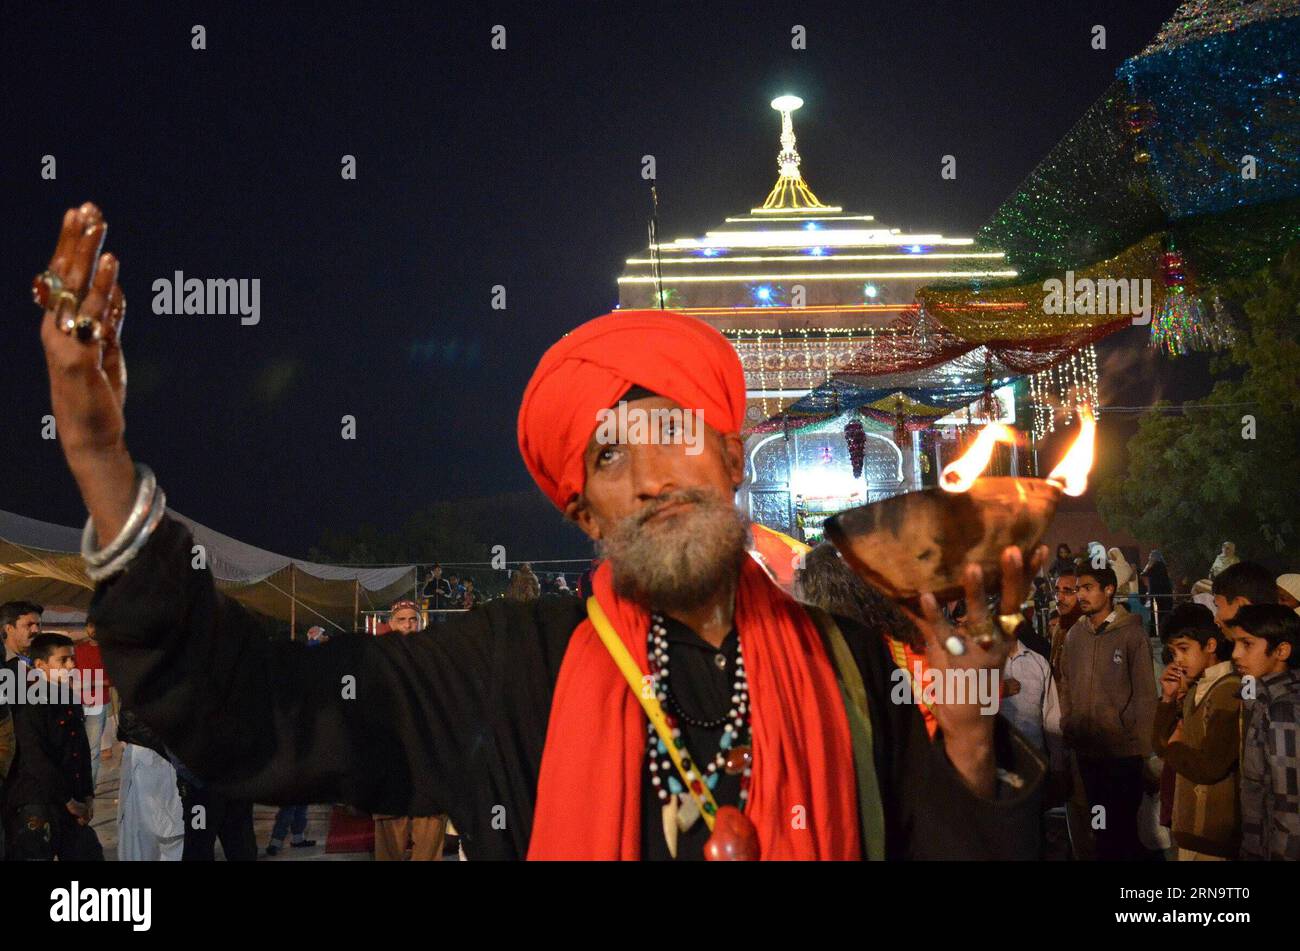 (151220) -- LAHORE, Dec. 19, 2015 -- A Muslim devotee holds an oil lamp as he dances at the shrine of the Sufi saint Mian Mir Sahib during a festival to mark the saint s death anniversary in eastern Pakistan s Lahore, Dec. 19, 2015. Hundreds of devotees are attending the two-day festival. ) PAKISTAN-LAHORE-RELIGIOUS FESTIVAL JamilxAhmed PUBLICATIONxNOTxINxCHN   151220 Lahore DEC 19 2015 a Muslim devotee holds to Oil Lamp As he Dances AT The Shrine of The Sufi Saint Mian me Sahib during a Festival to Mark The Saint S Death Anniversary in Eastern Pakistan S Lahore DEC 19 2015 hundreds of devotee Stock Photo